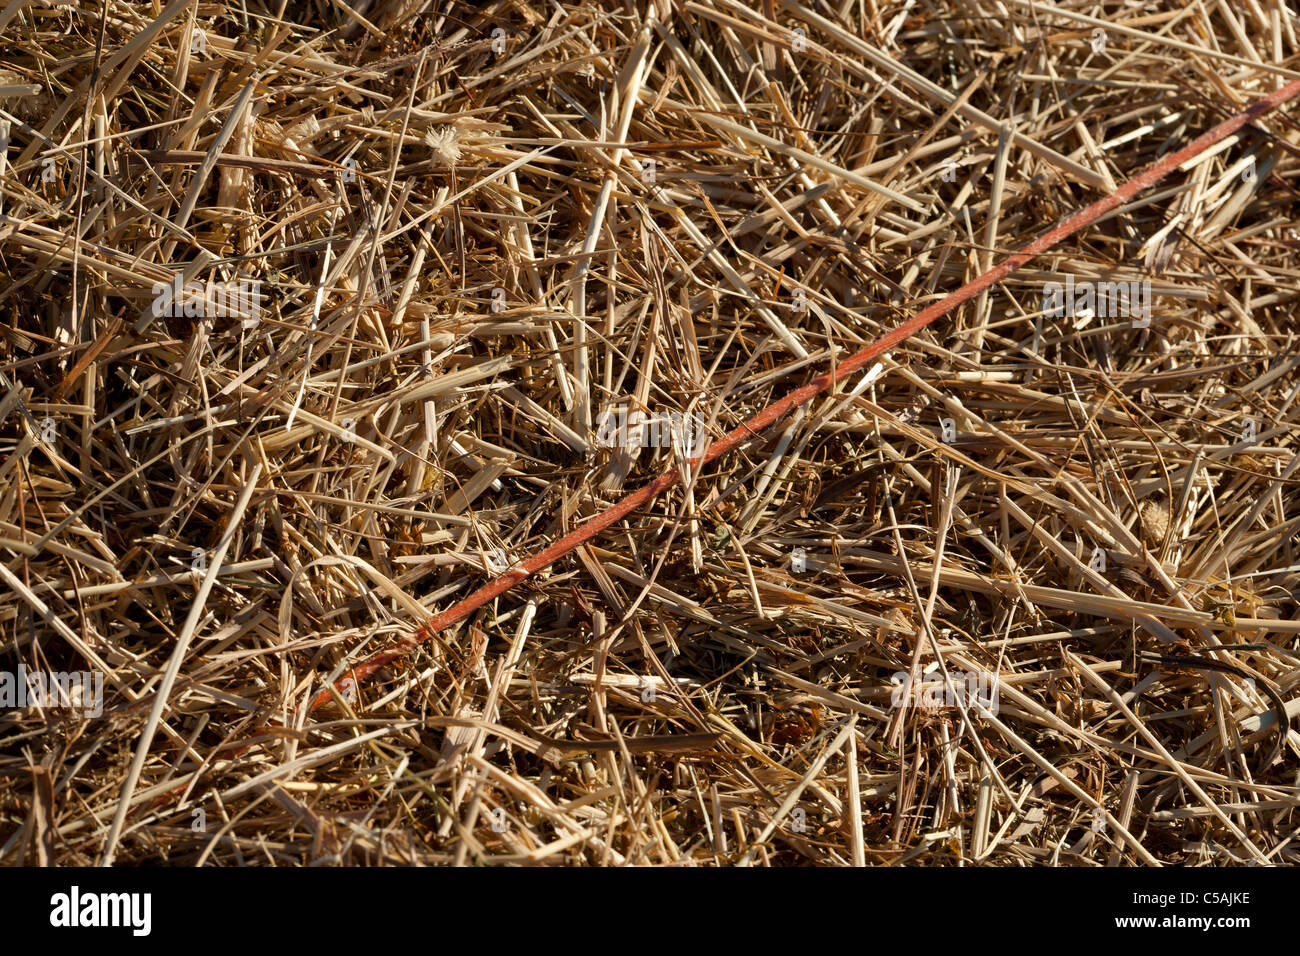 Close up of bailing twine holding a straw bale together Stock Photo